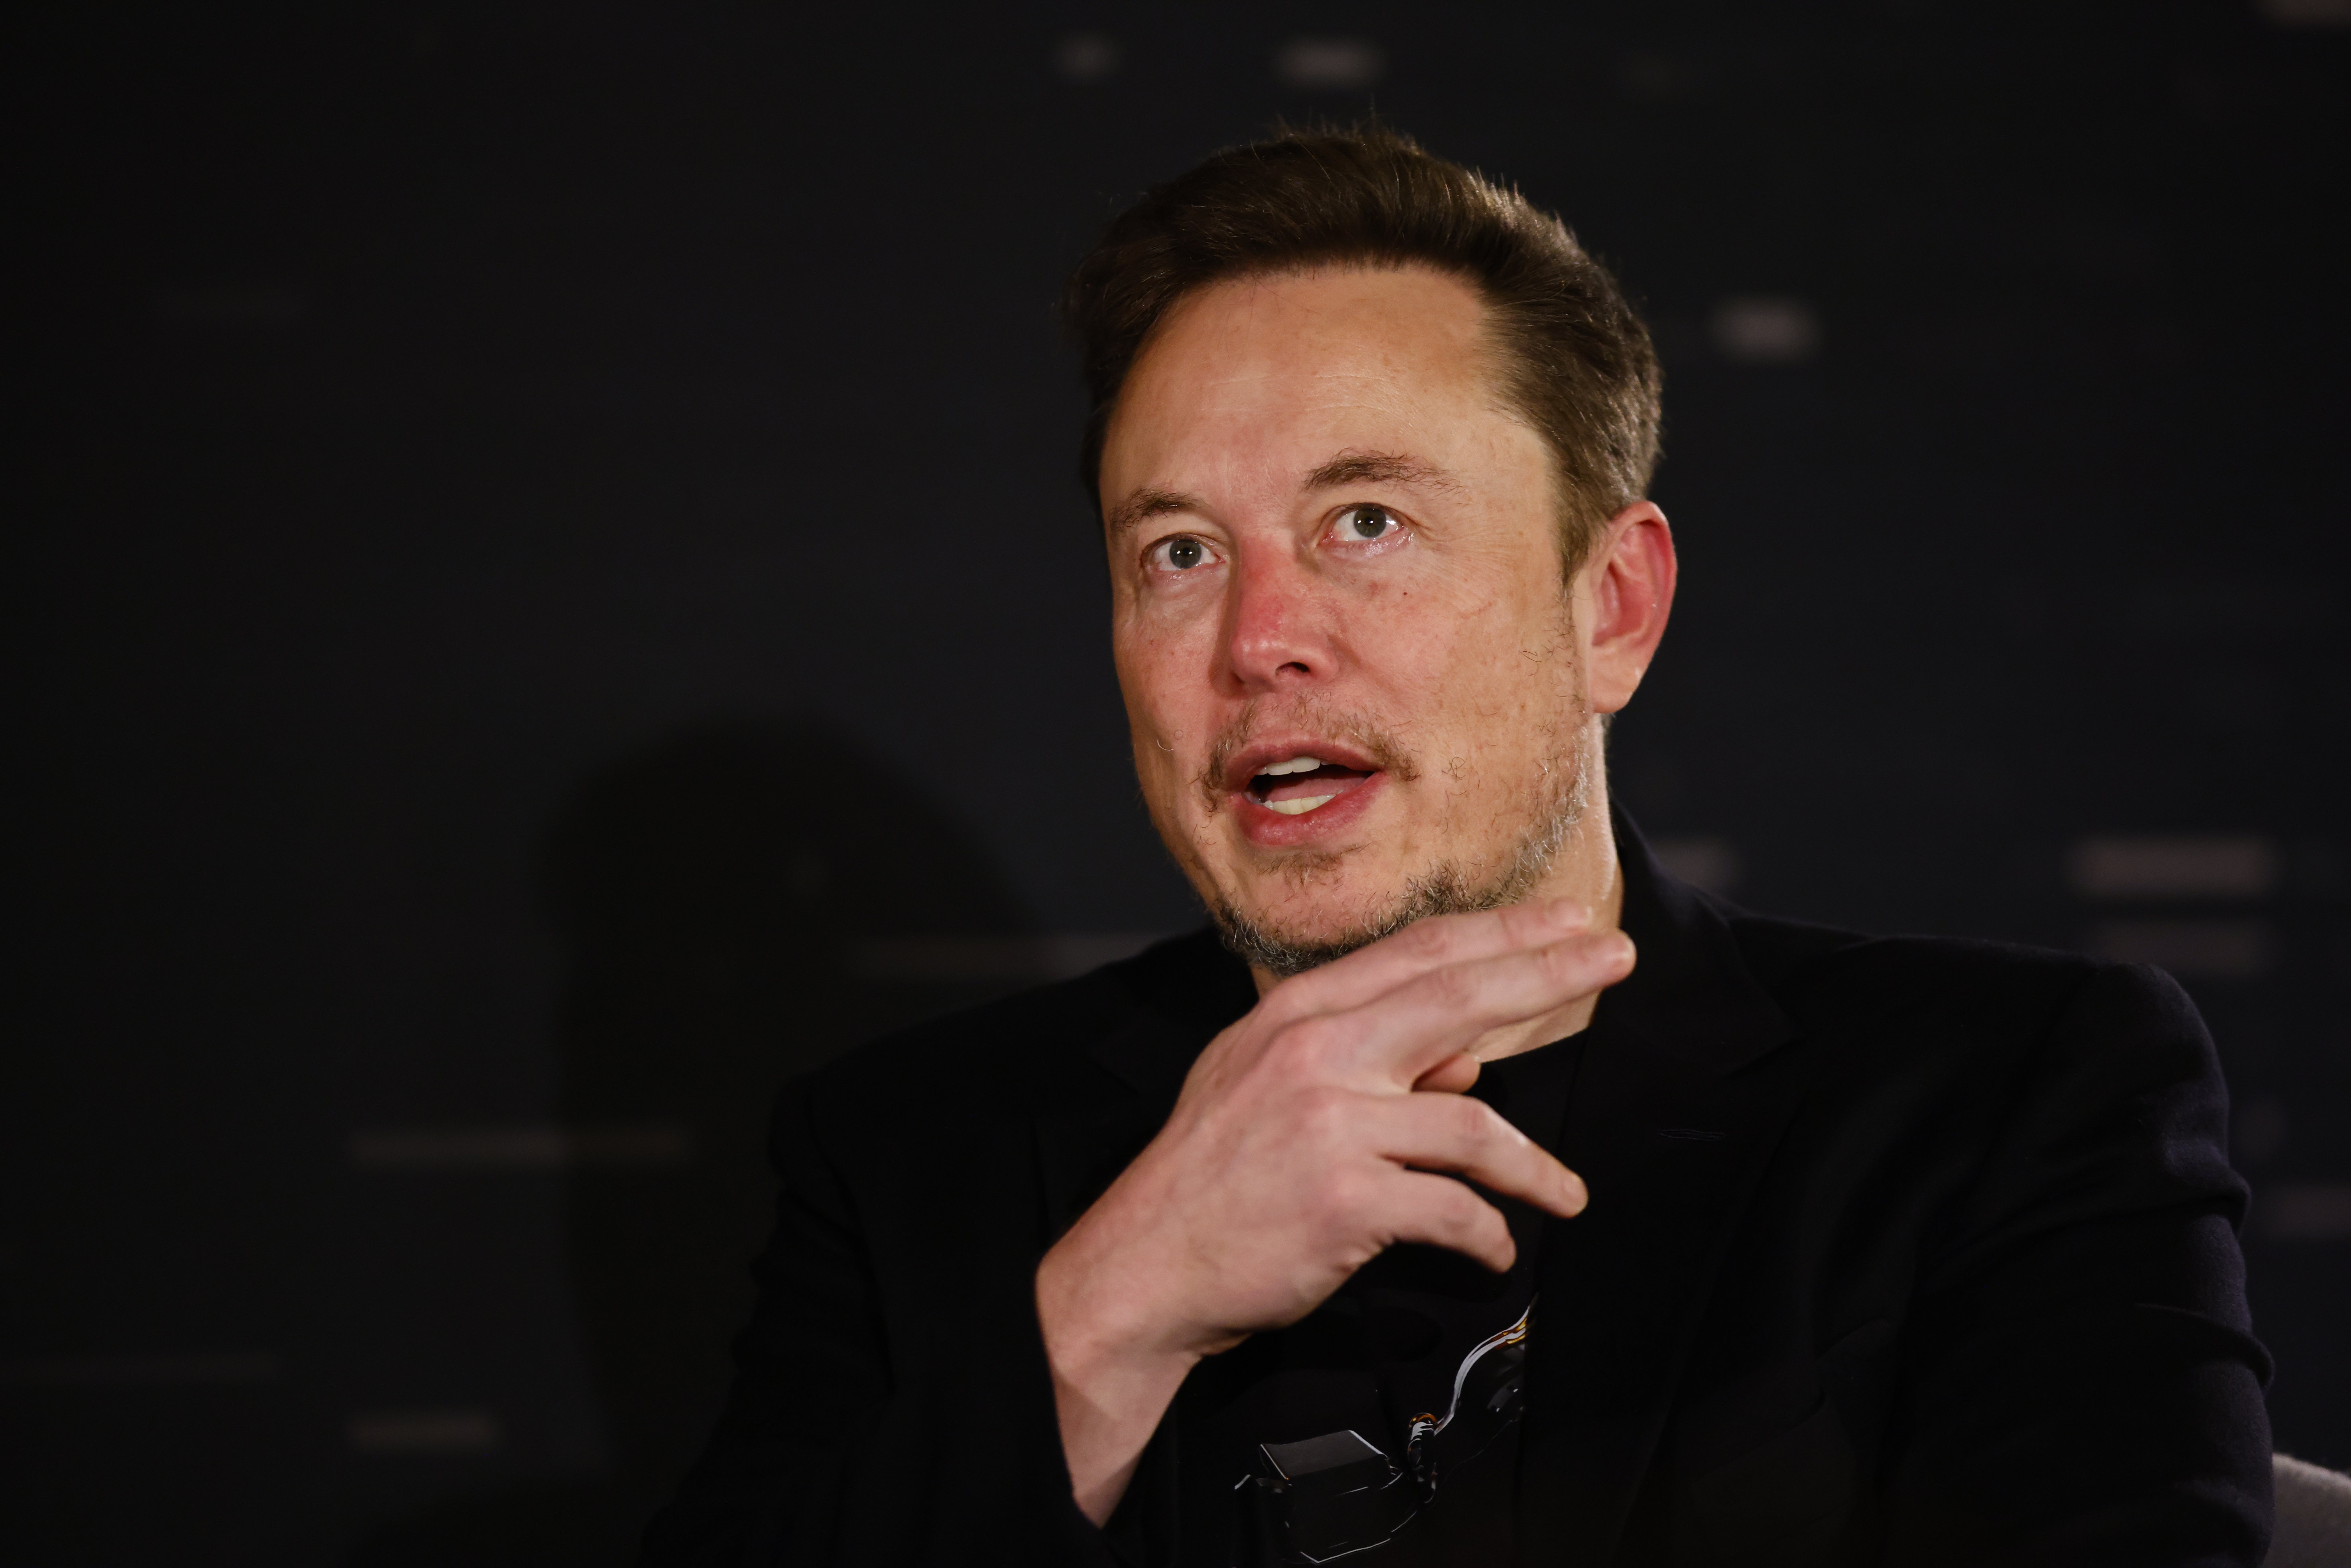 Elon Musk has been accused of amplifying the ‘Pizzagate’ conspiracy theory